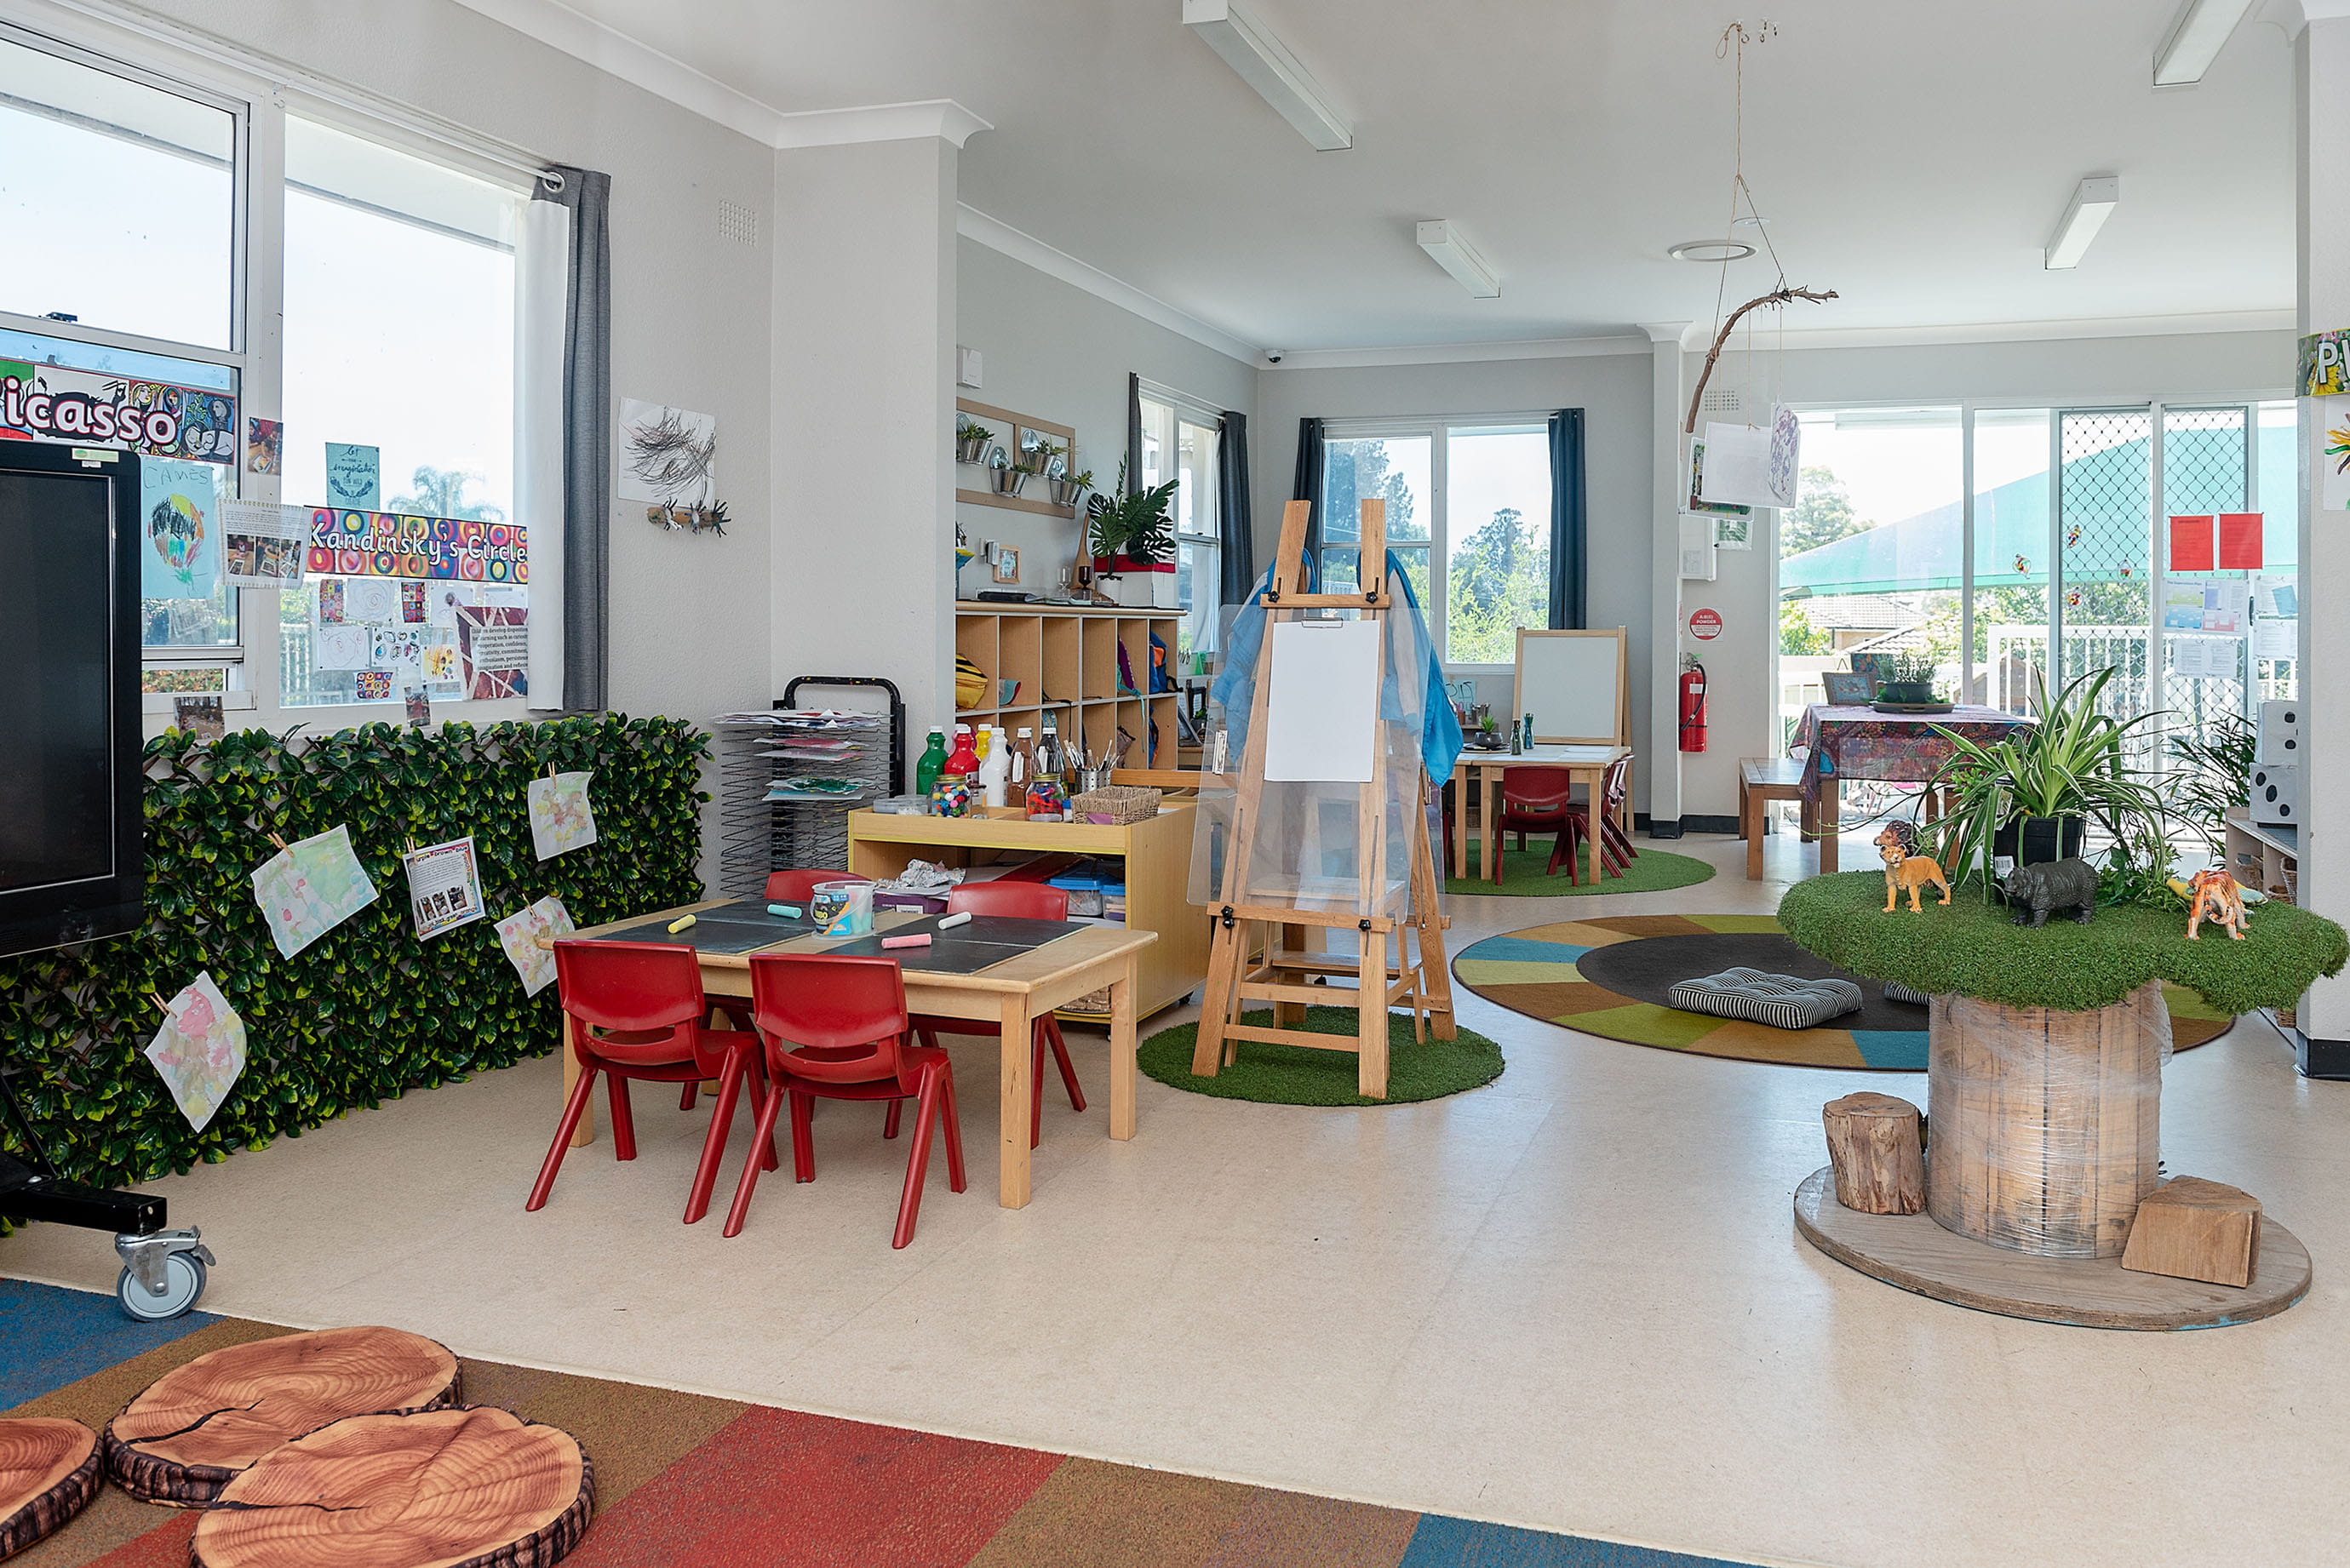 Indoor play room at First Grammar childcare